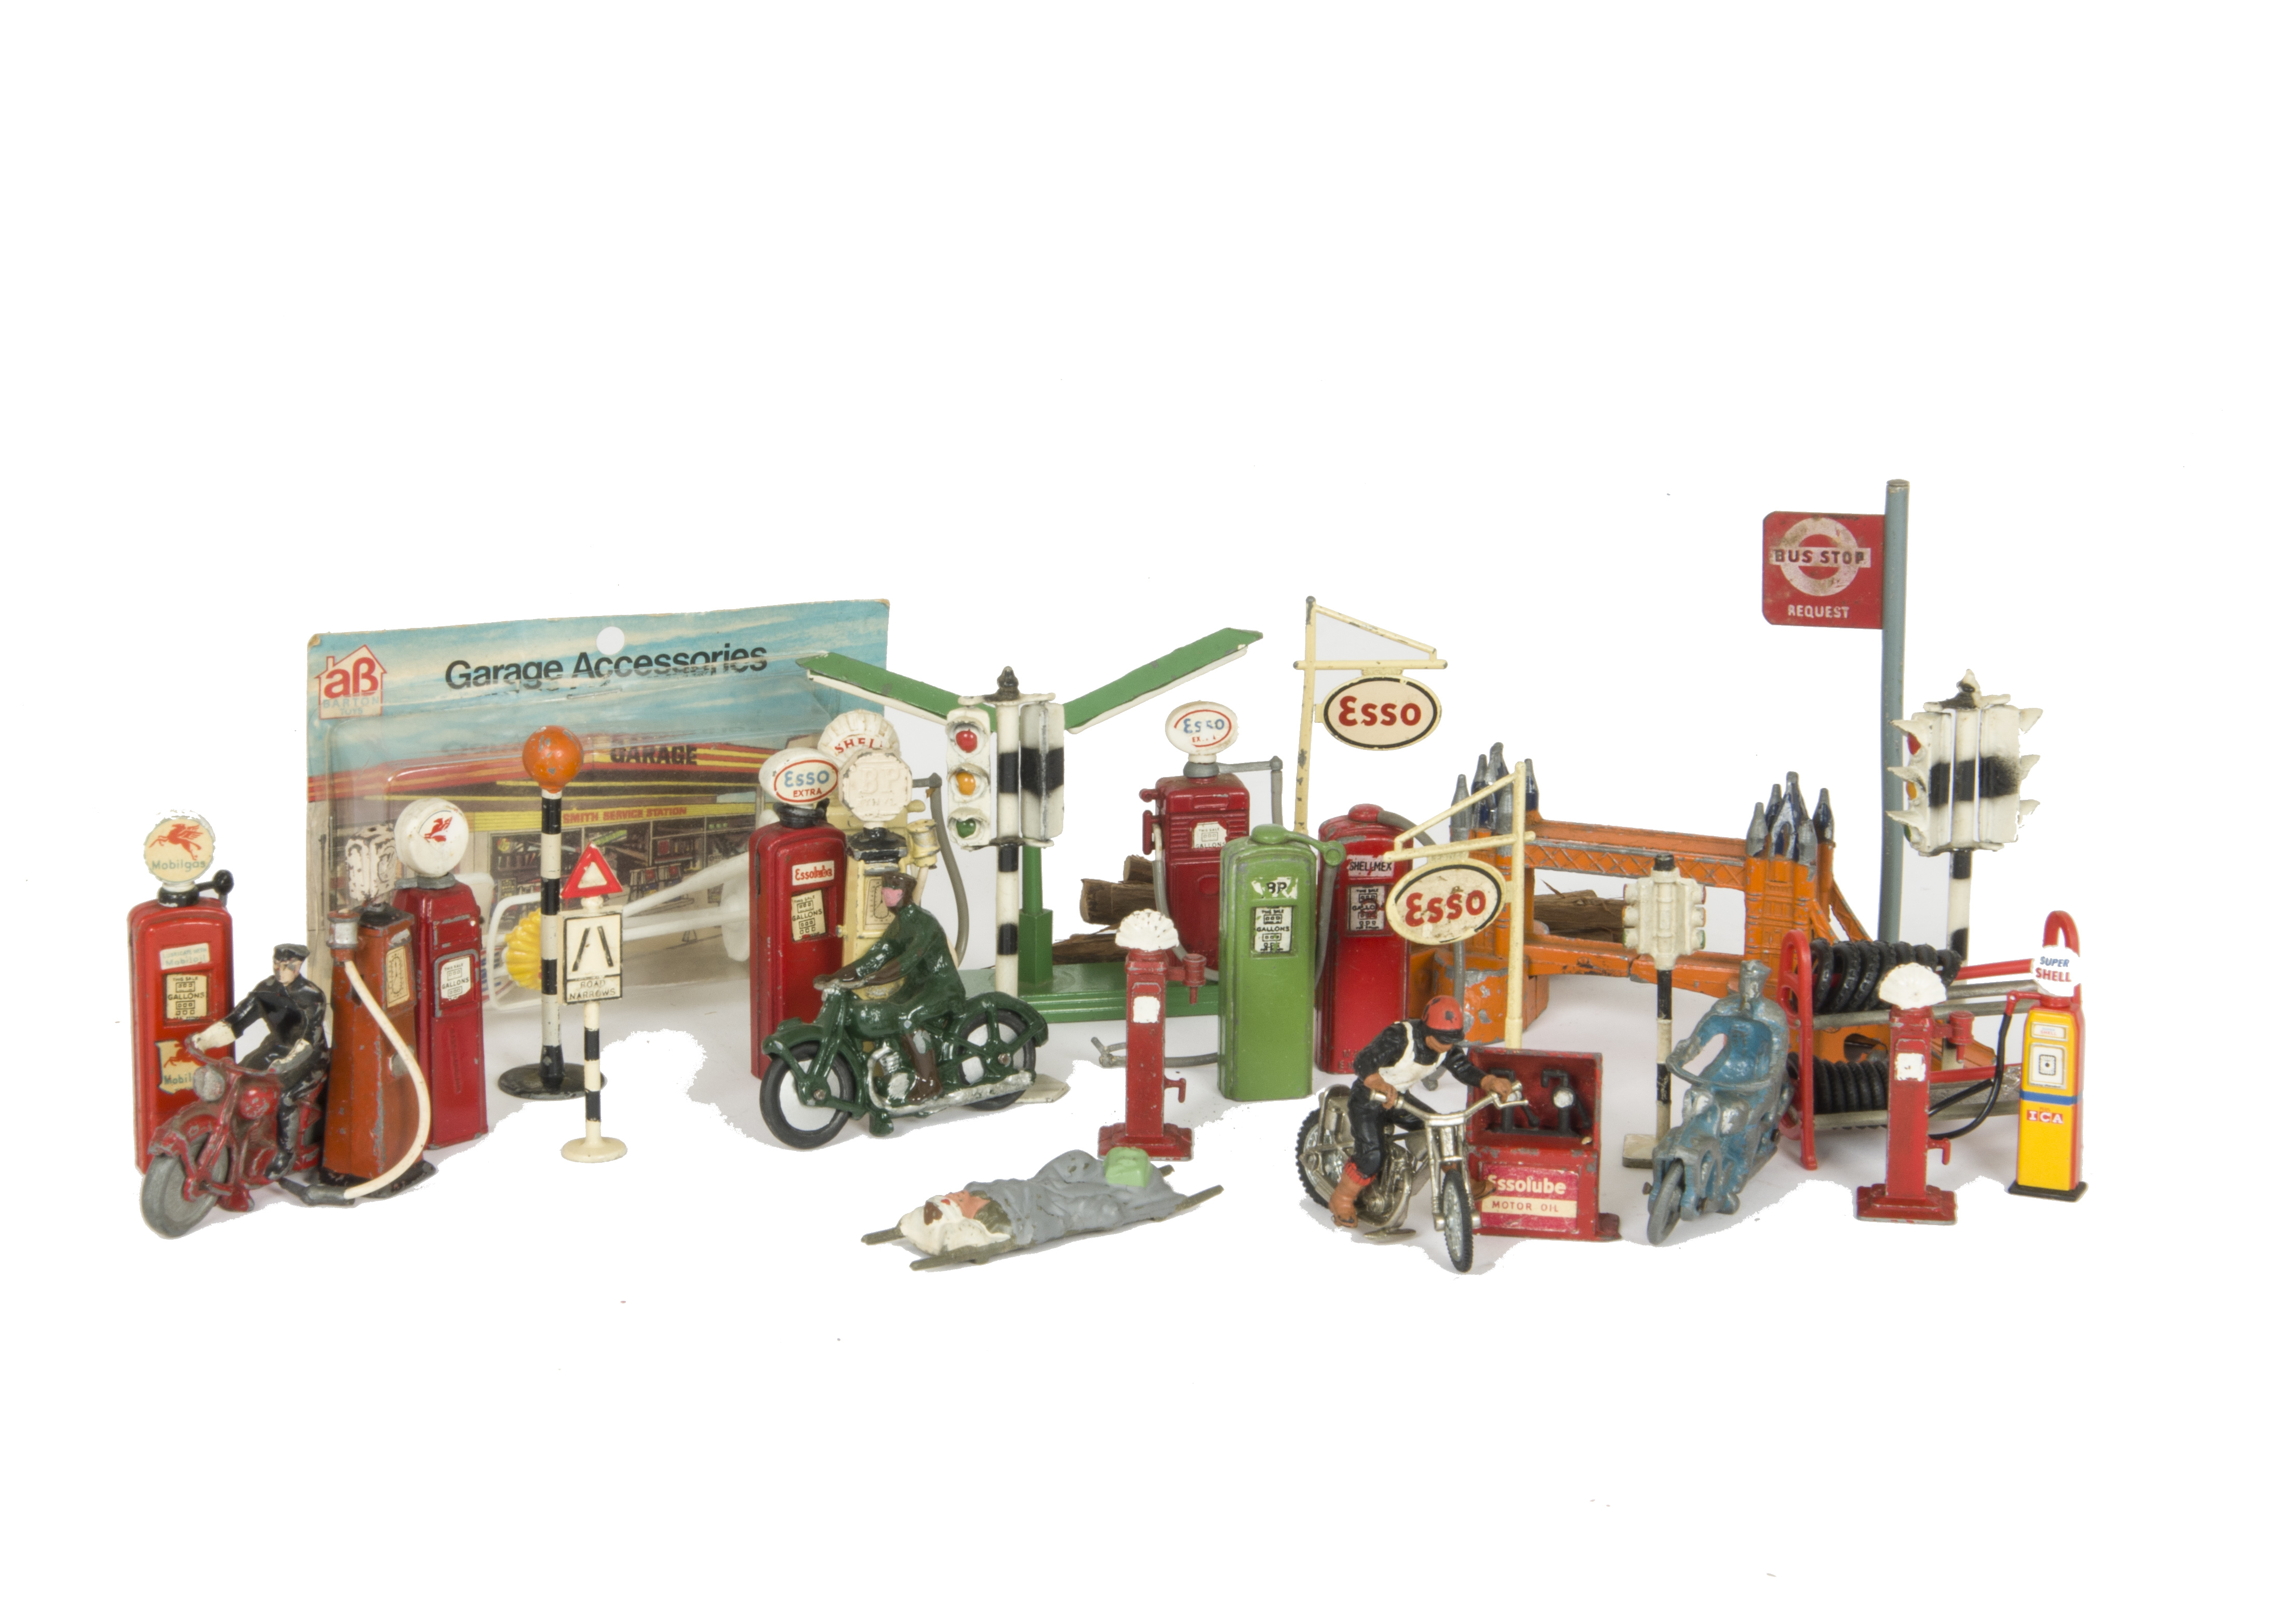 British Diecast Motorcycles, Street Furniture & Other Toys, including Johillco Dispatch Rider,